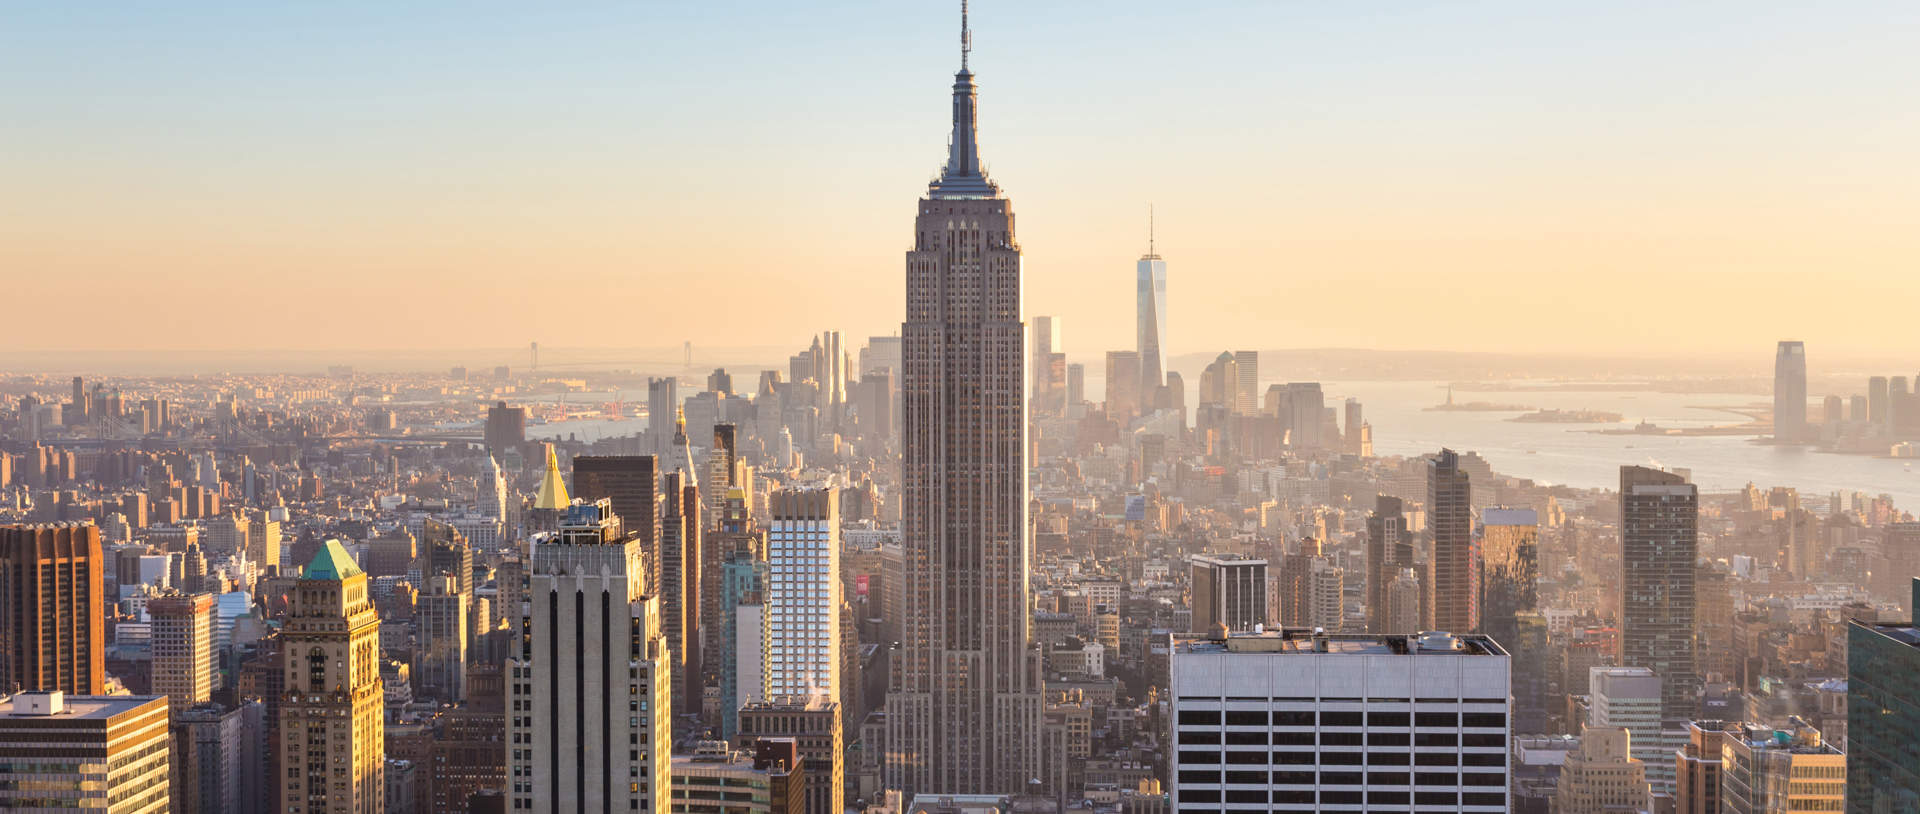 New York Skyline With Empire State Building